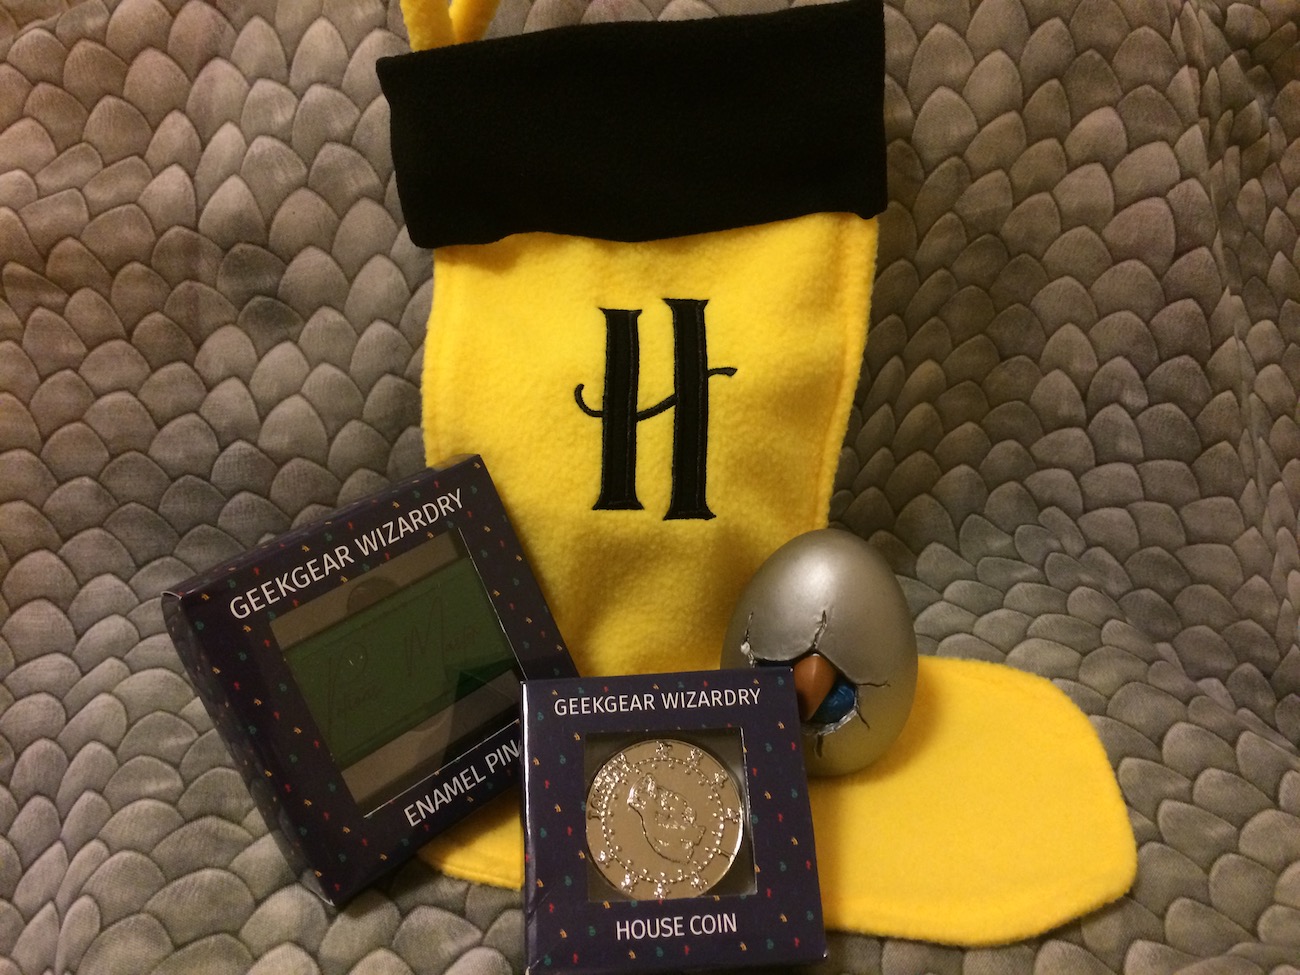 Also included in this month’s box were a Hogwarts House stocking, an enamel pin badge, a limited-edition wizardry coin, and a collectible magical creature egg.